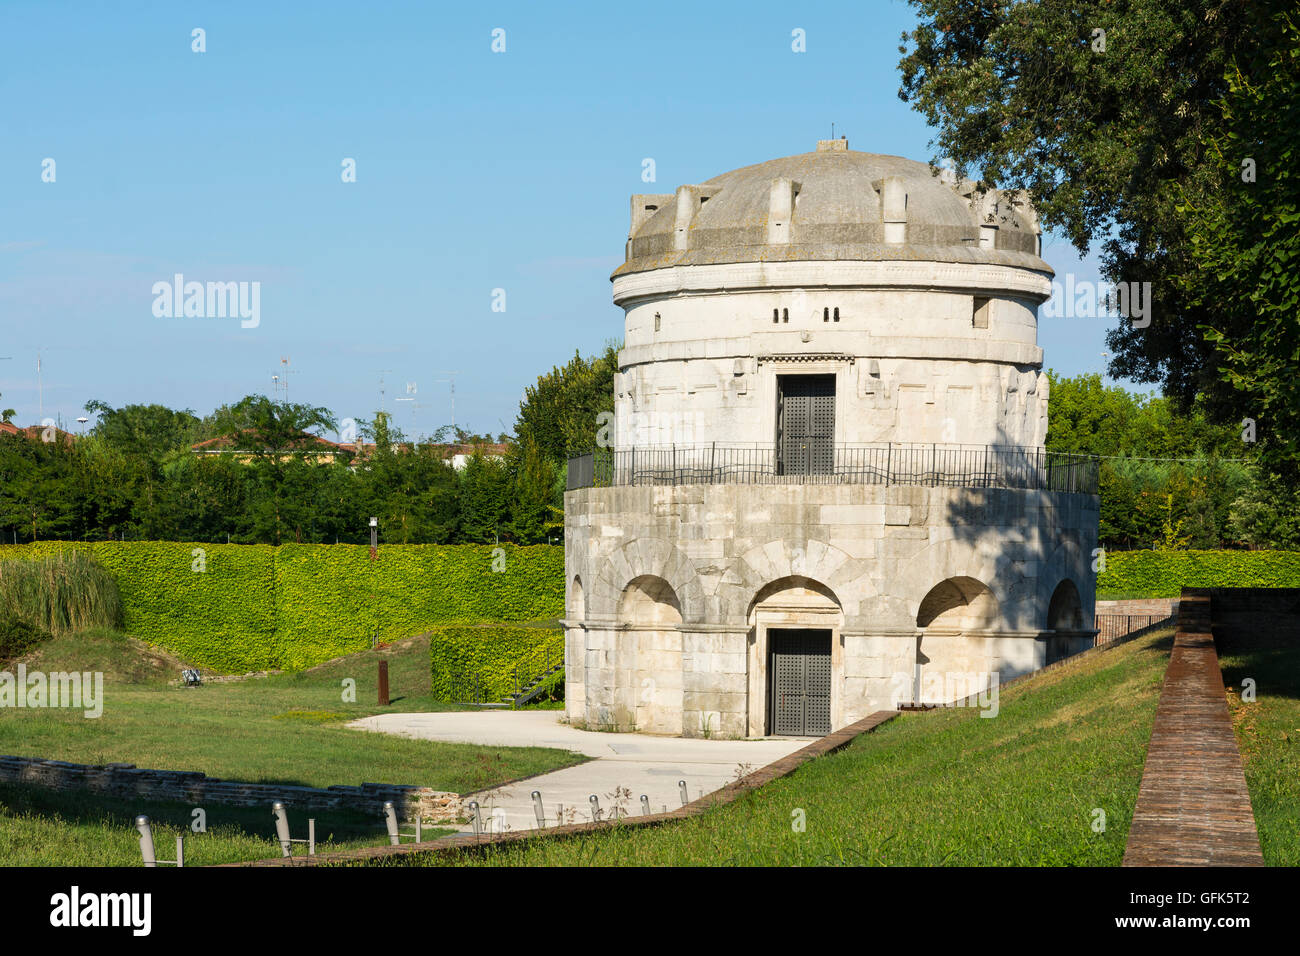 Ravenna,Italy-august 21,2015:mausoleum of Theodoric in Ravenna-Italy,during a sunny day. Stock Photo